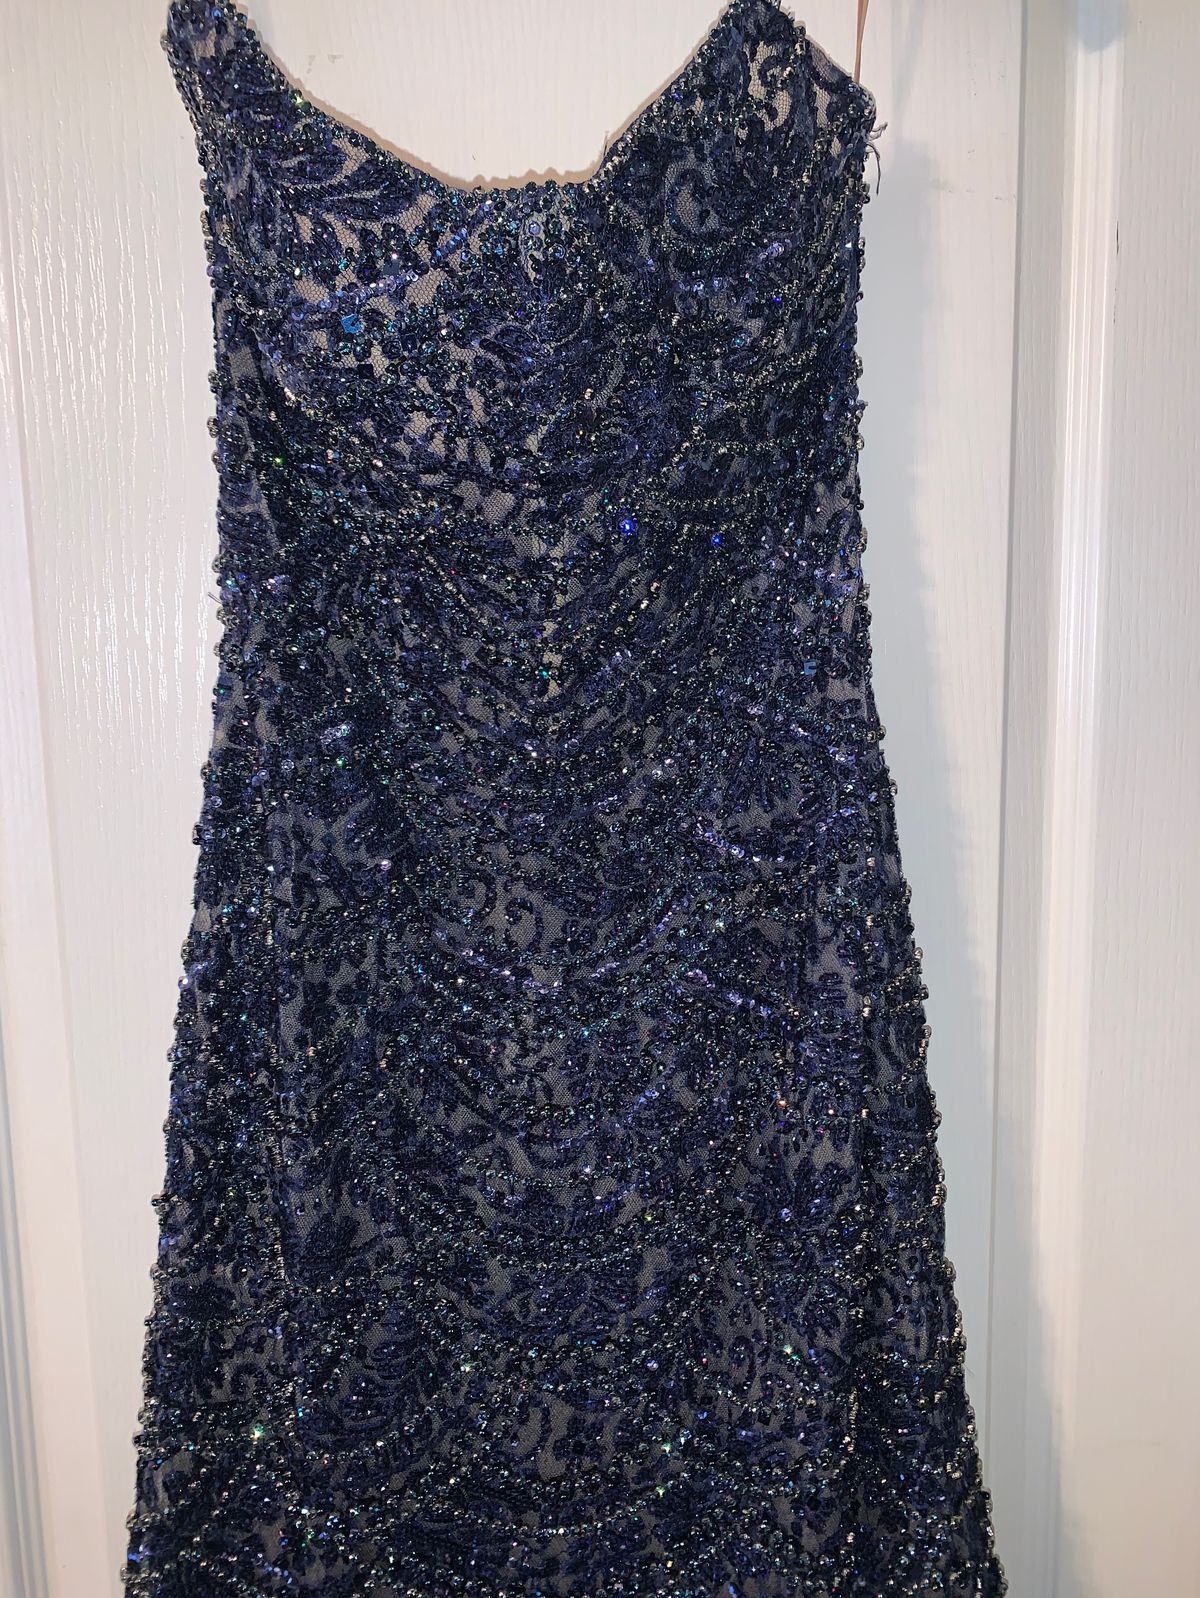 Sherri Hill Size 6 Pageant Strapless Sheer Navy Blue Mermaid Dress on Queenly